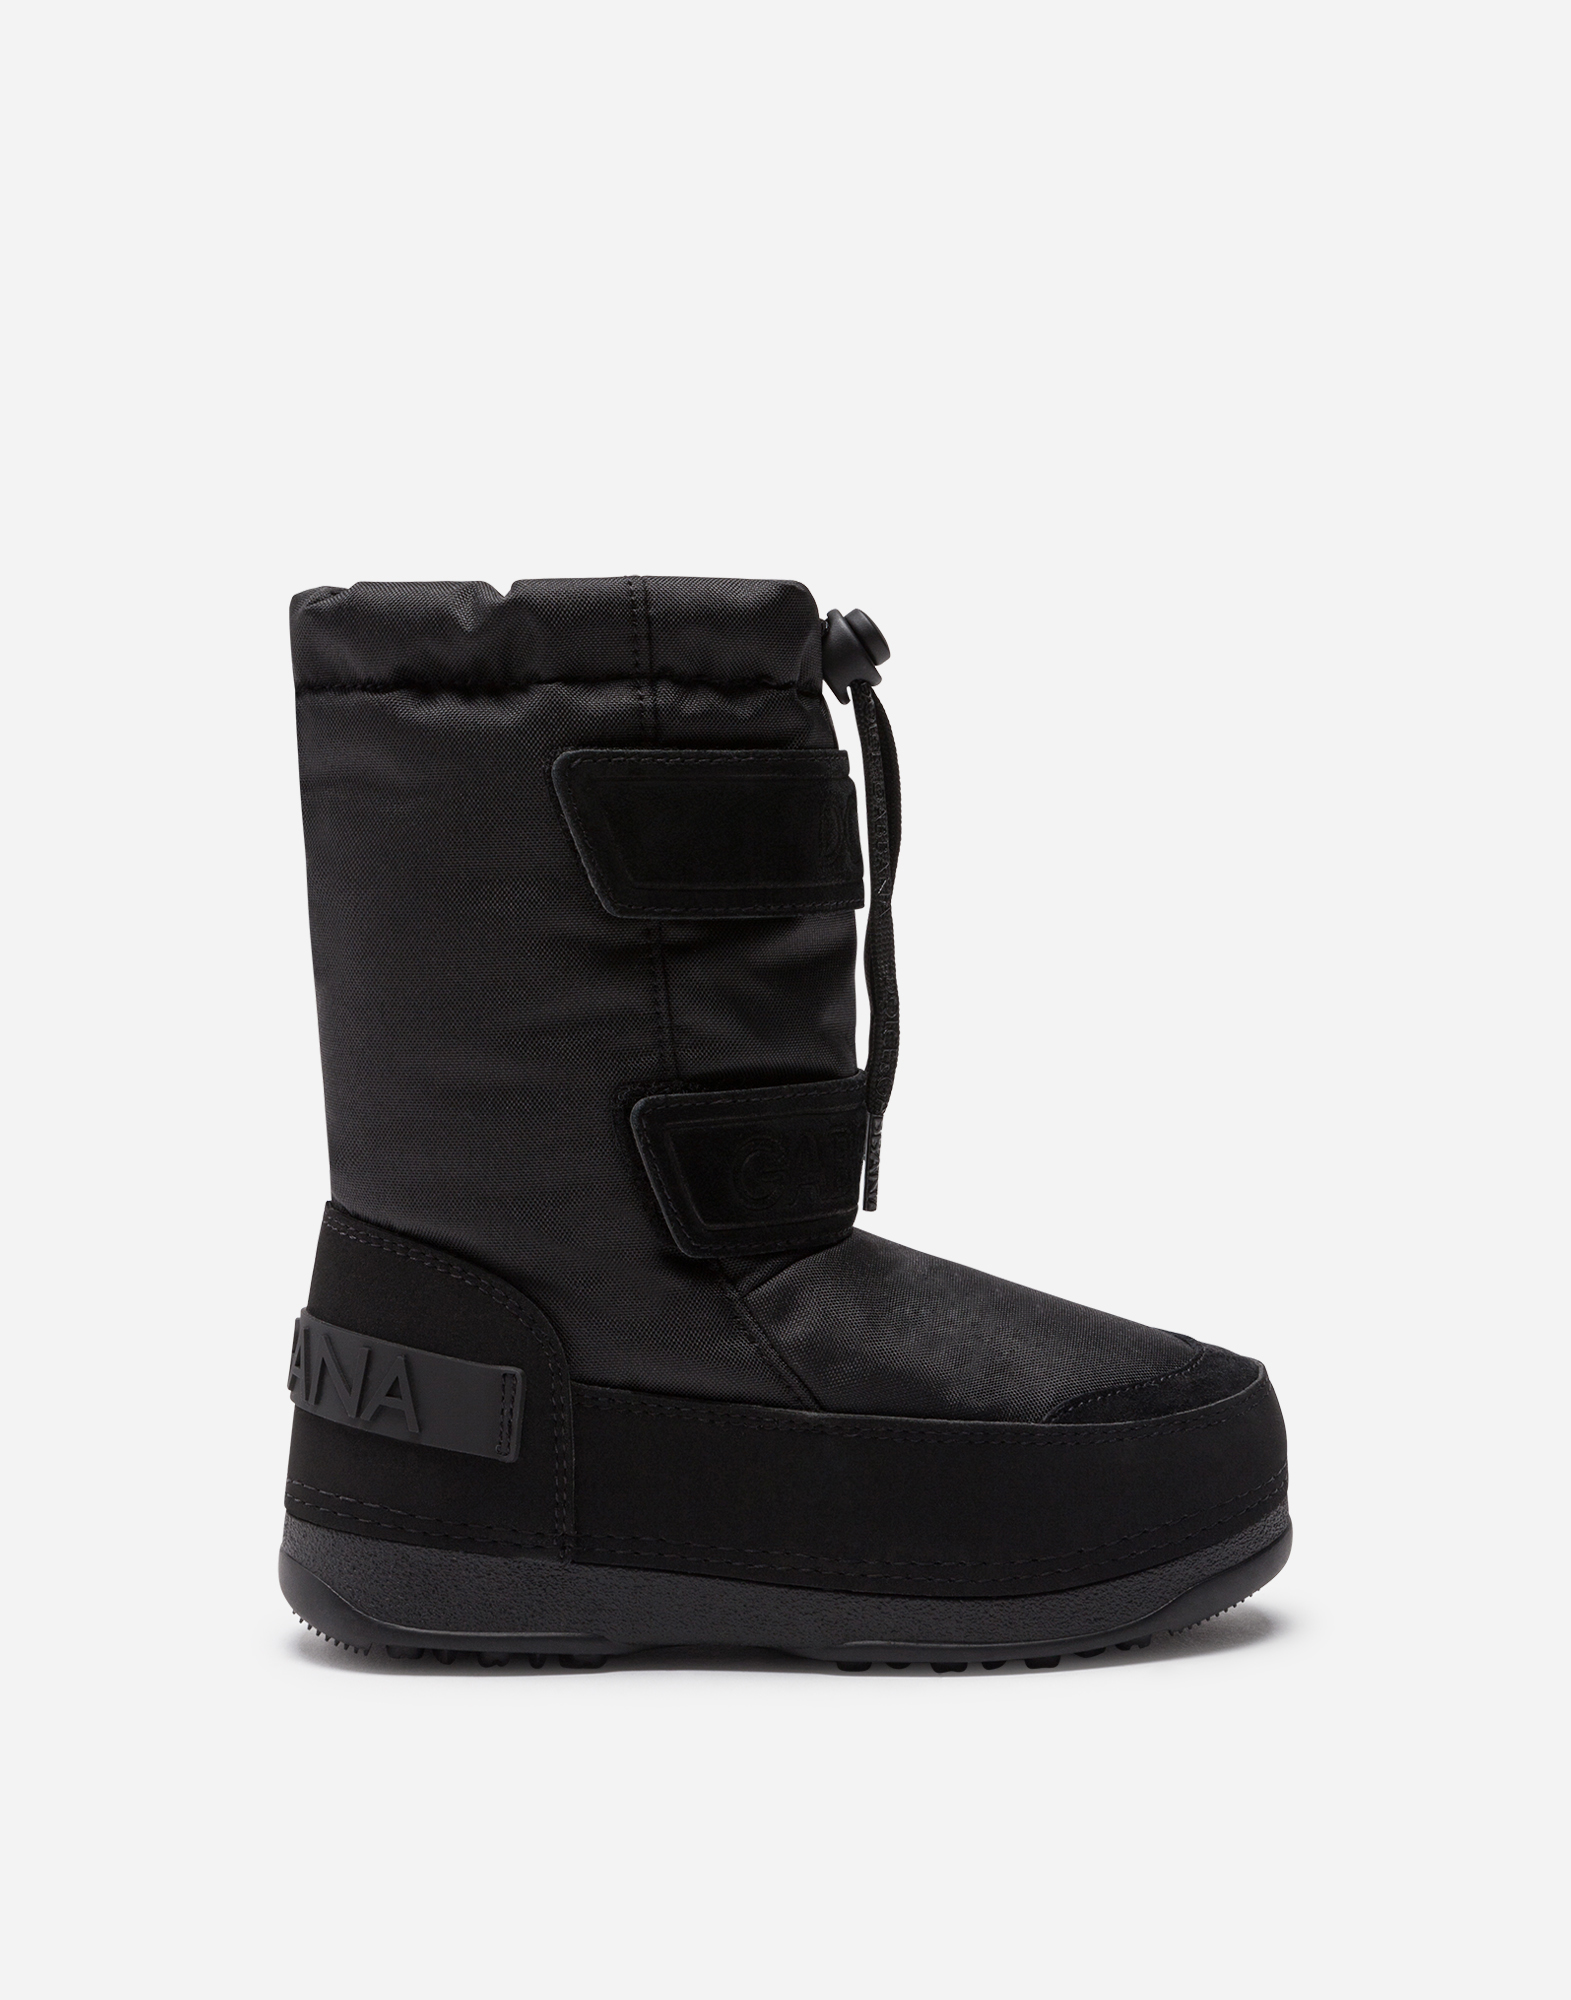 DOLCE & GABBANA NYLON AND SPLIT-GRAIN LEATHER SNOW BOOTS WITH LOGO